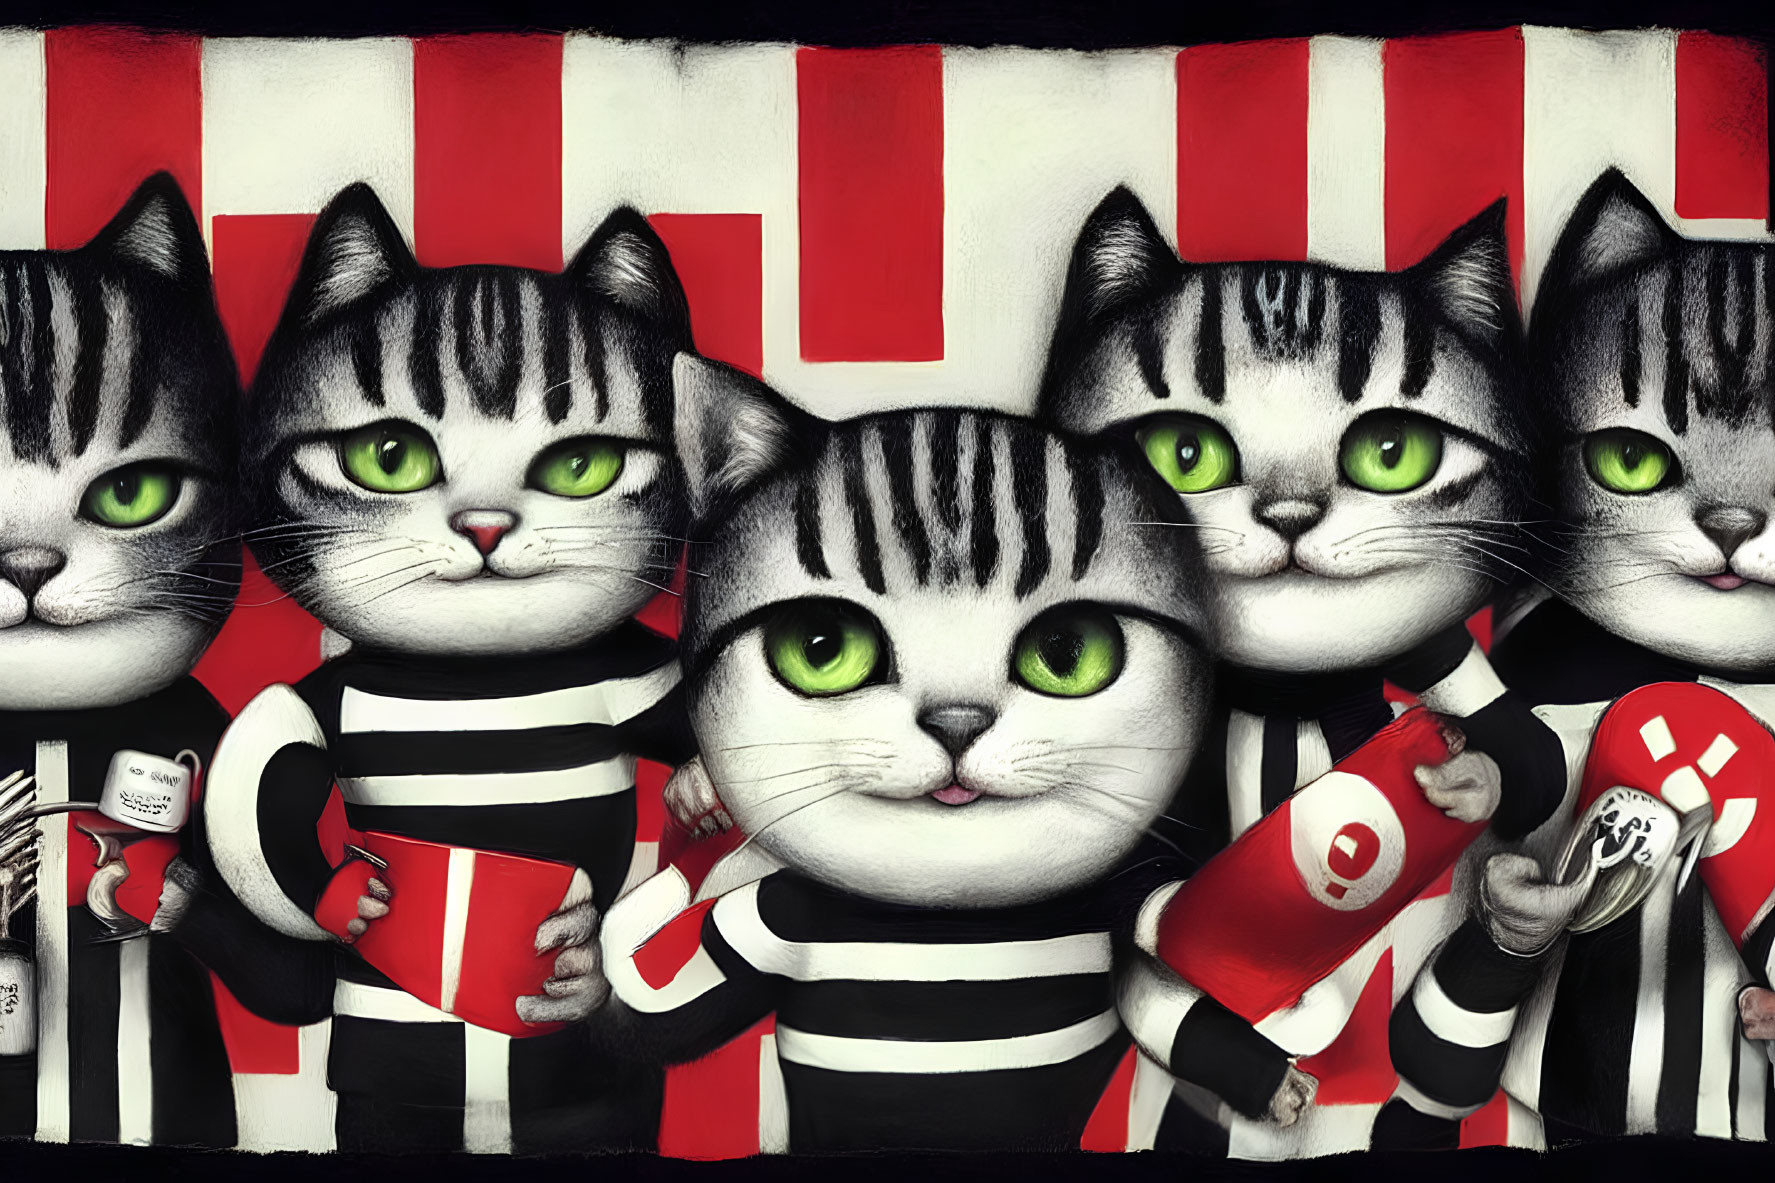 Five cartoon cats with black and white stripes and green eyes on red and white striped background